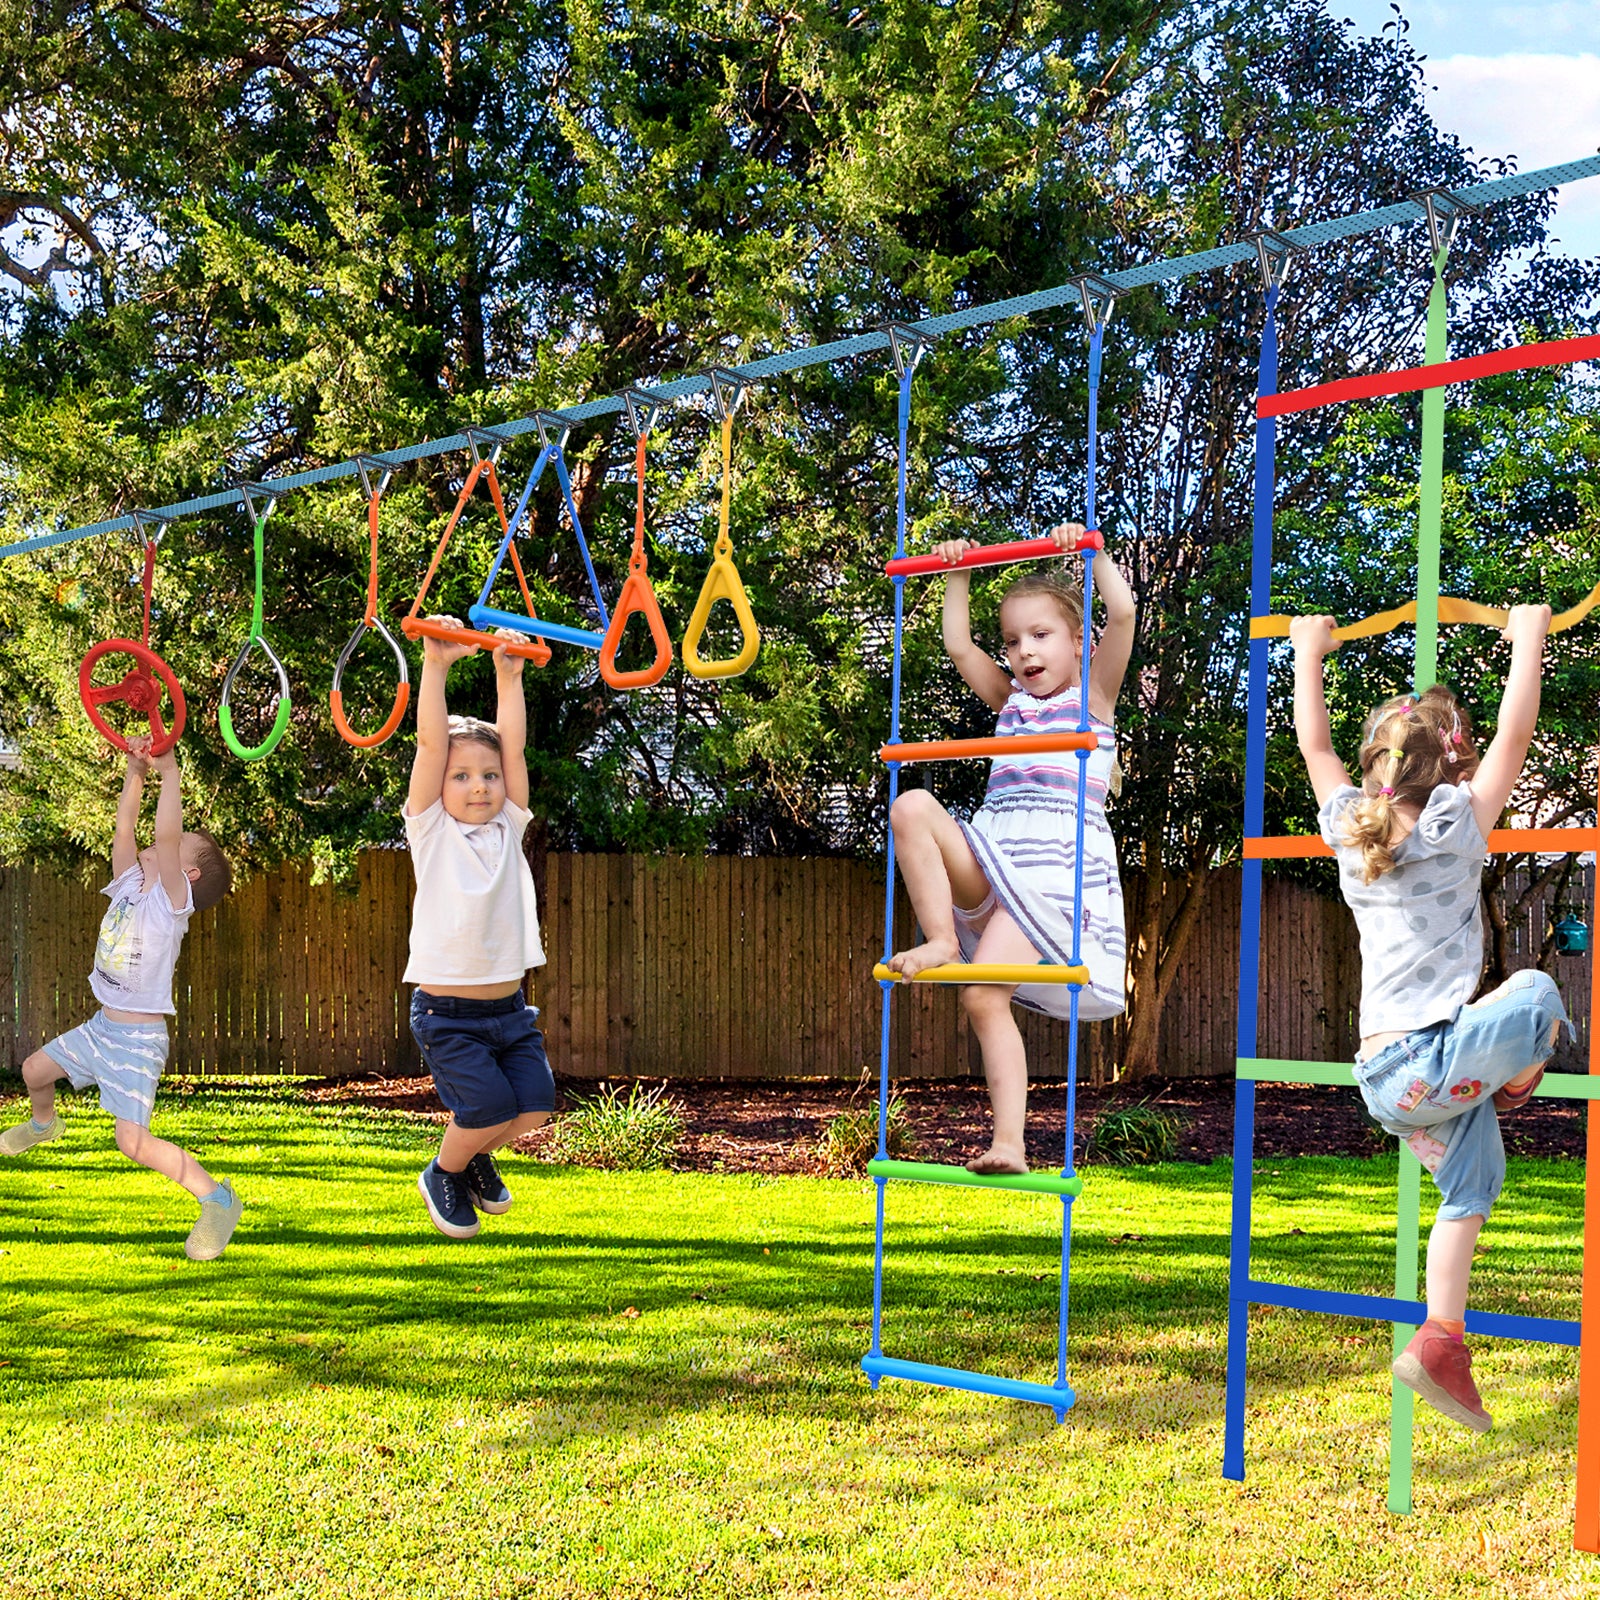 50ft Ninja Warrior Obstacle Course for Kids with Swing, Ninja Rope Course with 10 Obstacles